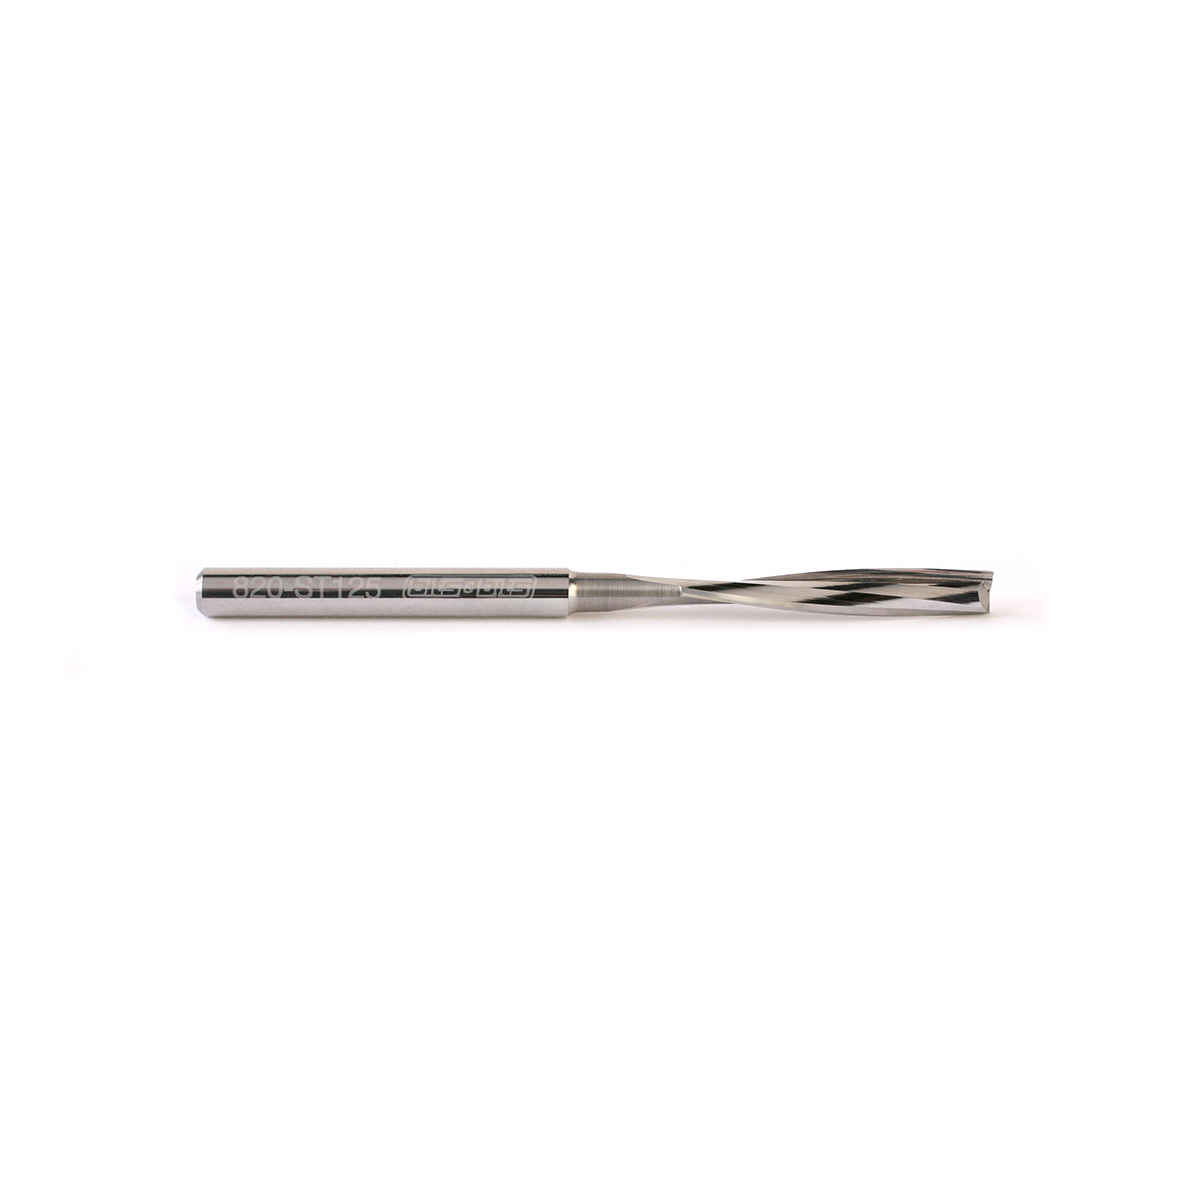 AT 18K 7 Stainless Steel Electronic Pointed Tip Straight